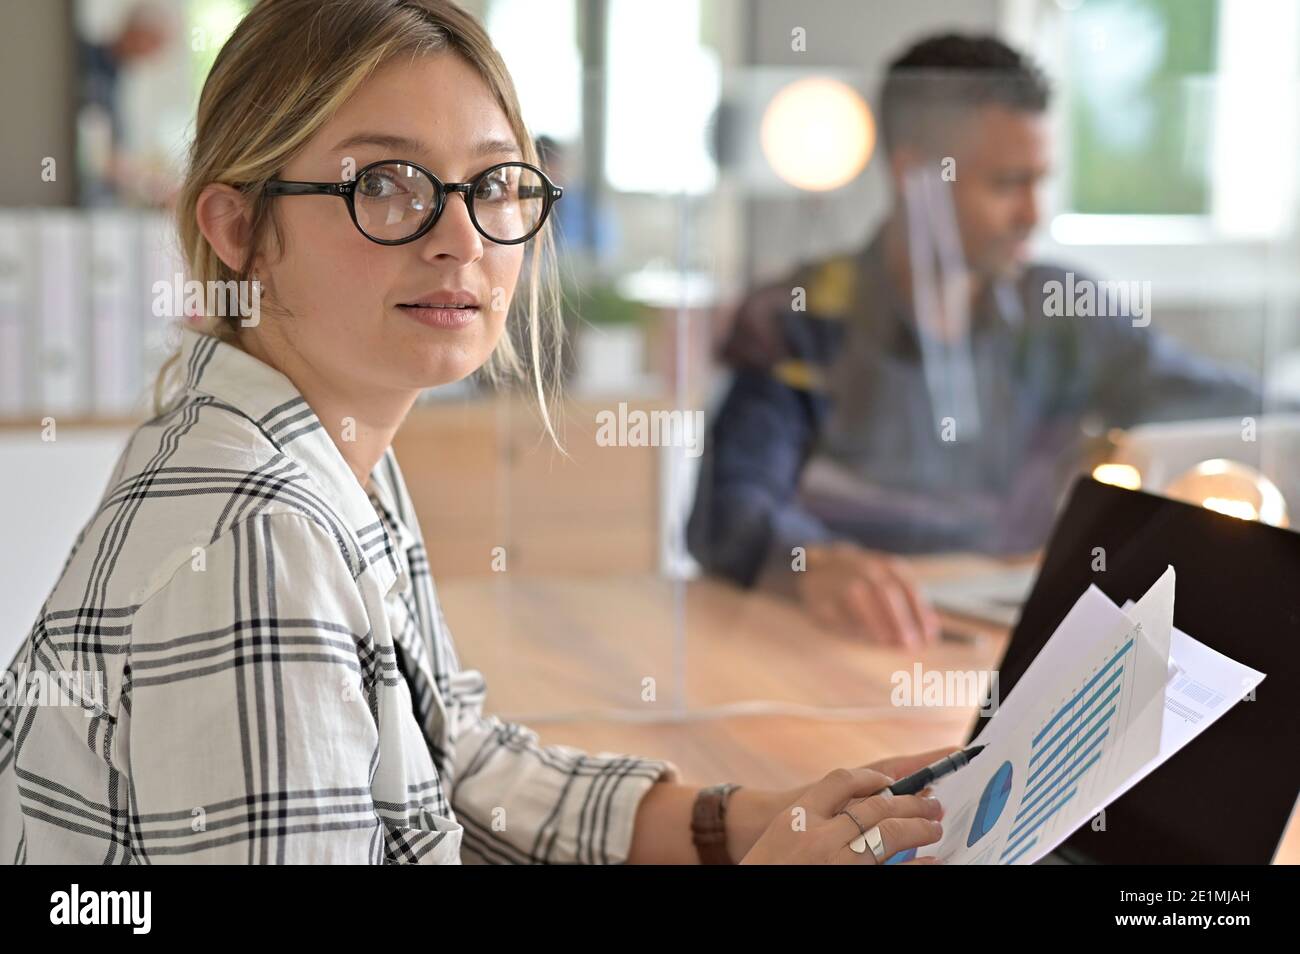 Office worker with eyeglasses working in open space area protected with plexiglas Stock Photo